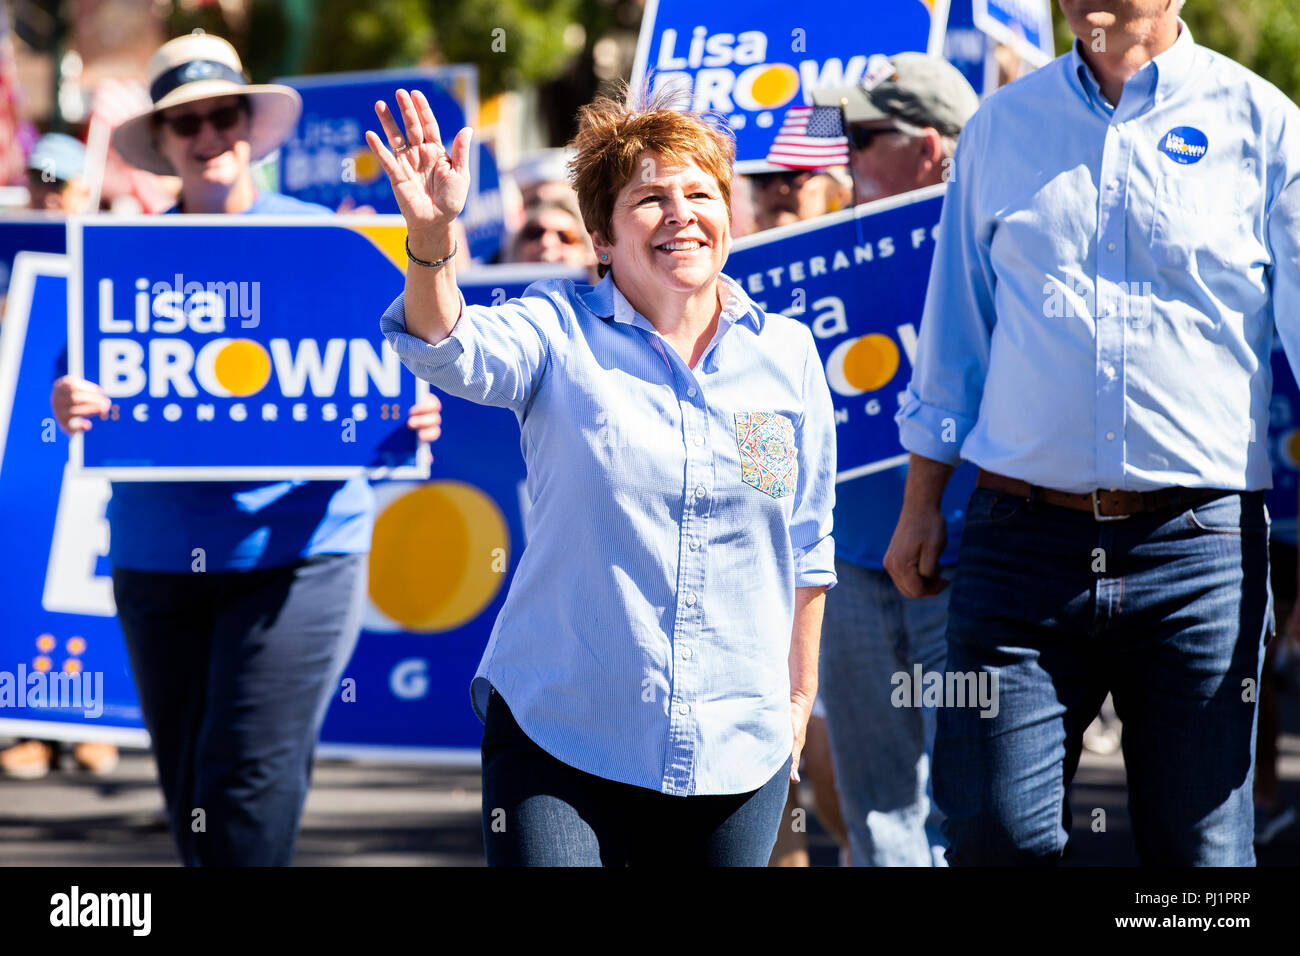 Lisa Brown, a Democratic candidate running to represent Washington's 5th Congressional District, marches with her supporters in the annual Frontier Da Stock Photo